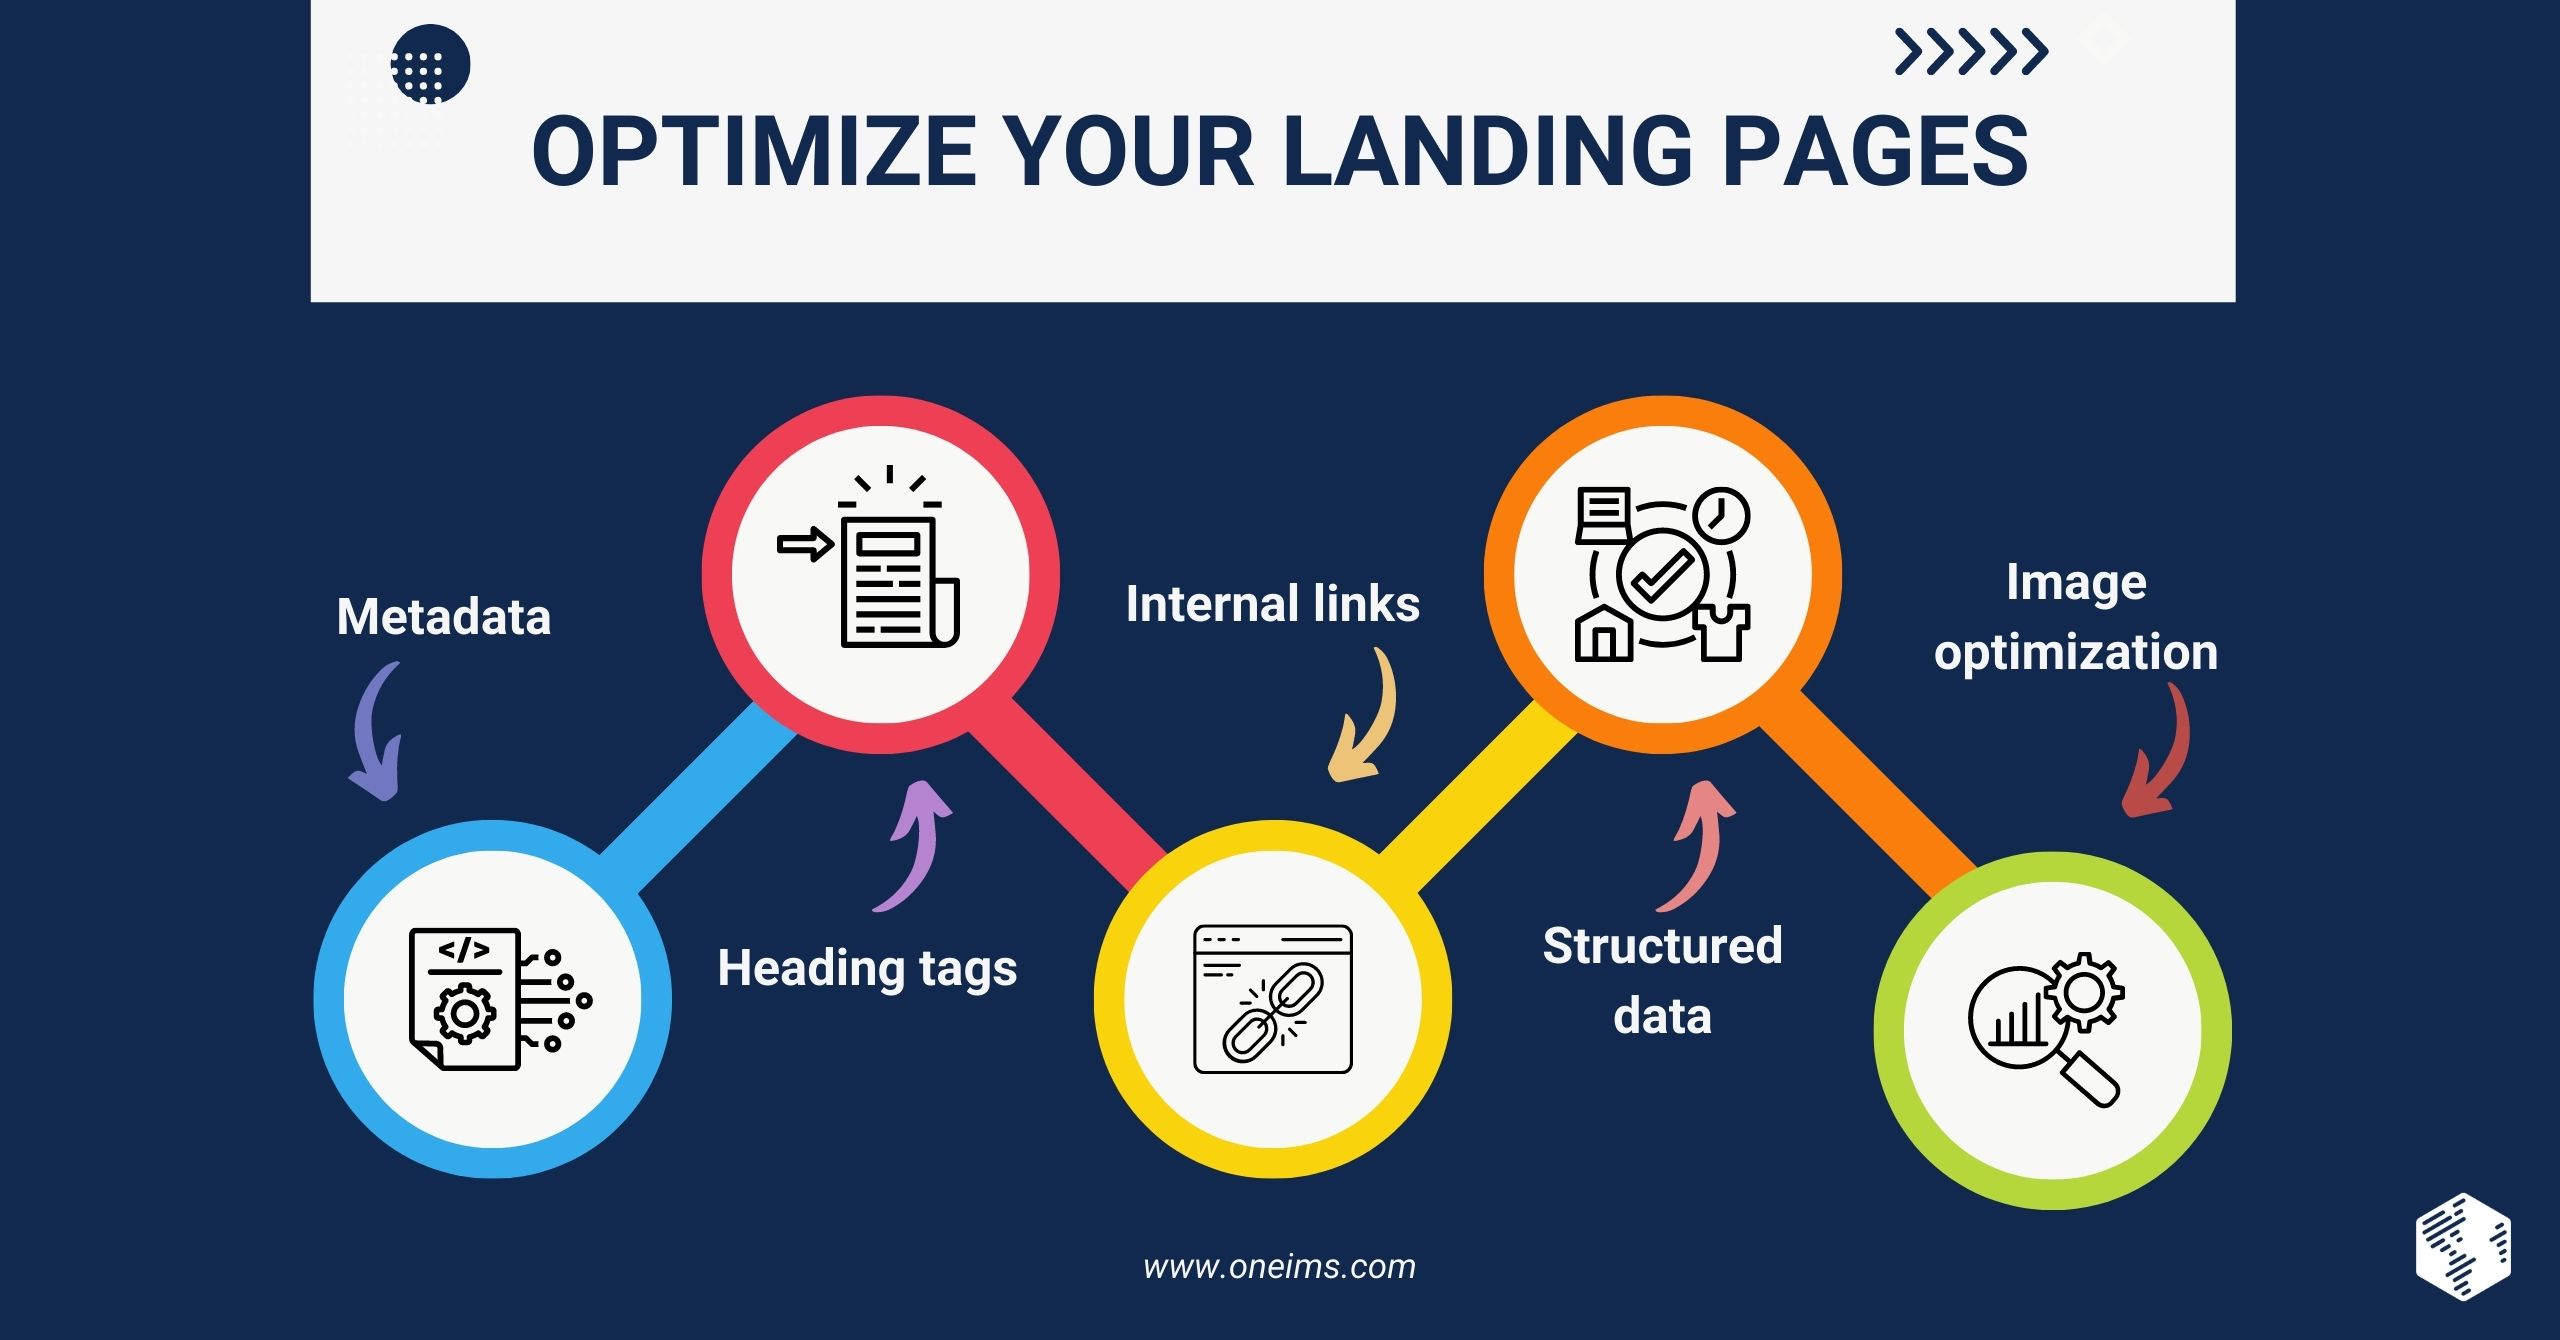 How to optimize landing pages